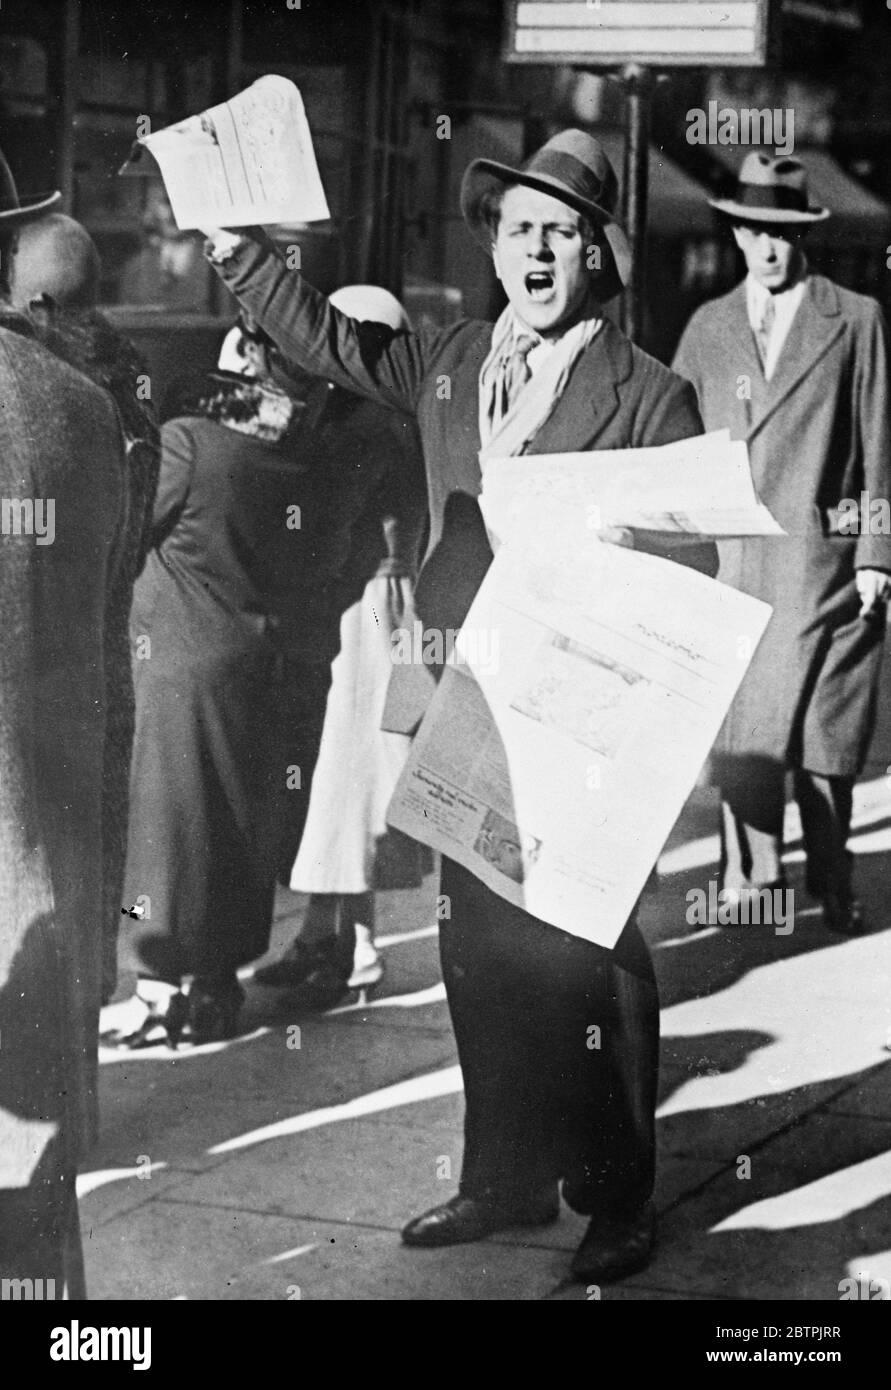 Adowa Falls !.  Adowa Falls ! - a newsboy in Rome calls the news of the Italian victory at Adowa in the Italo - Abyssinian conflict . 7 October 1935 Stock Photo